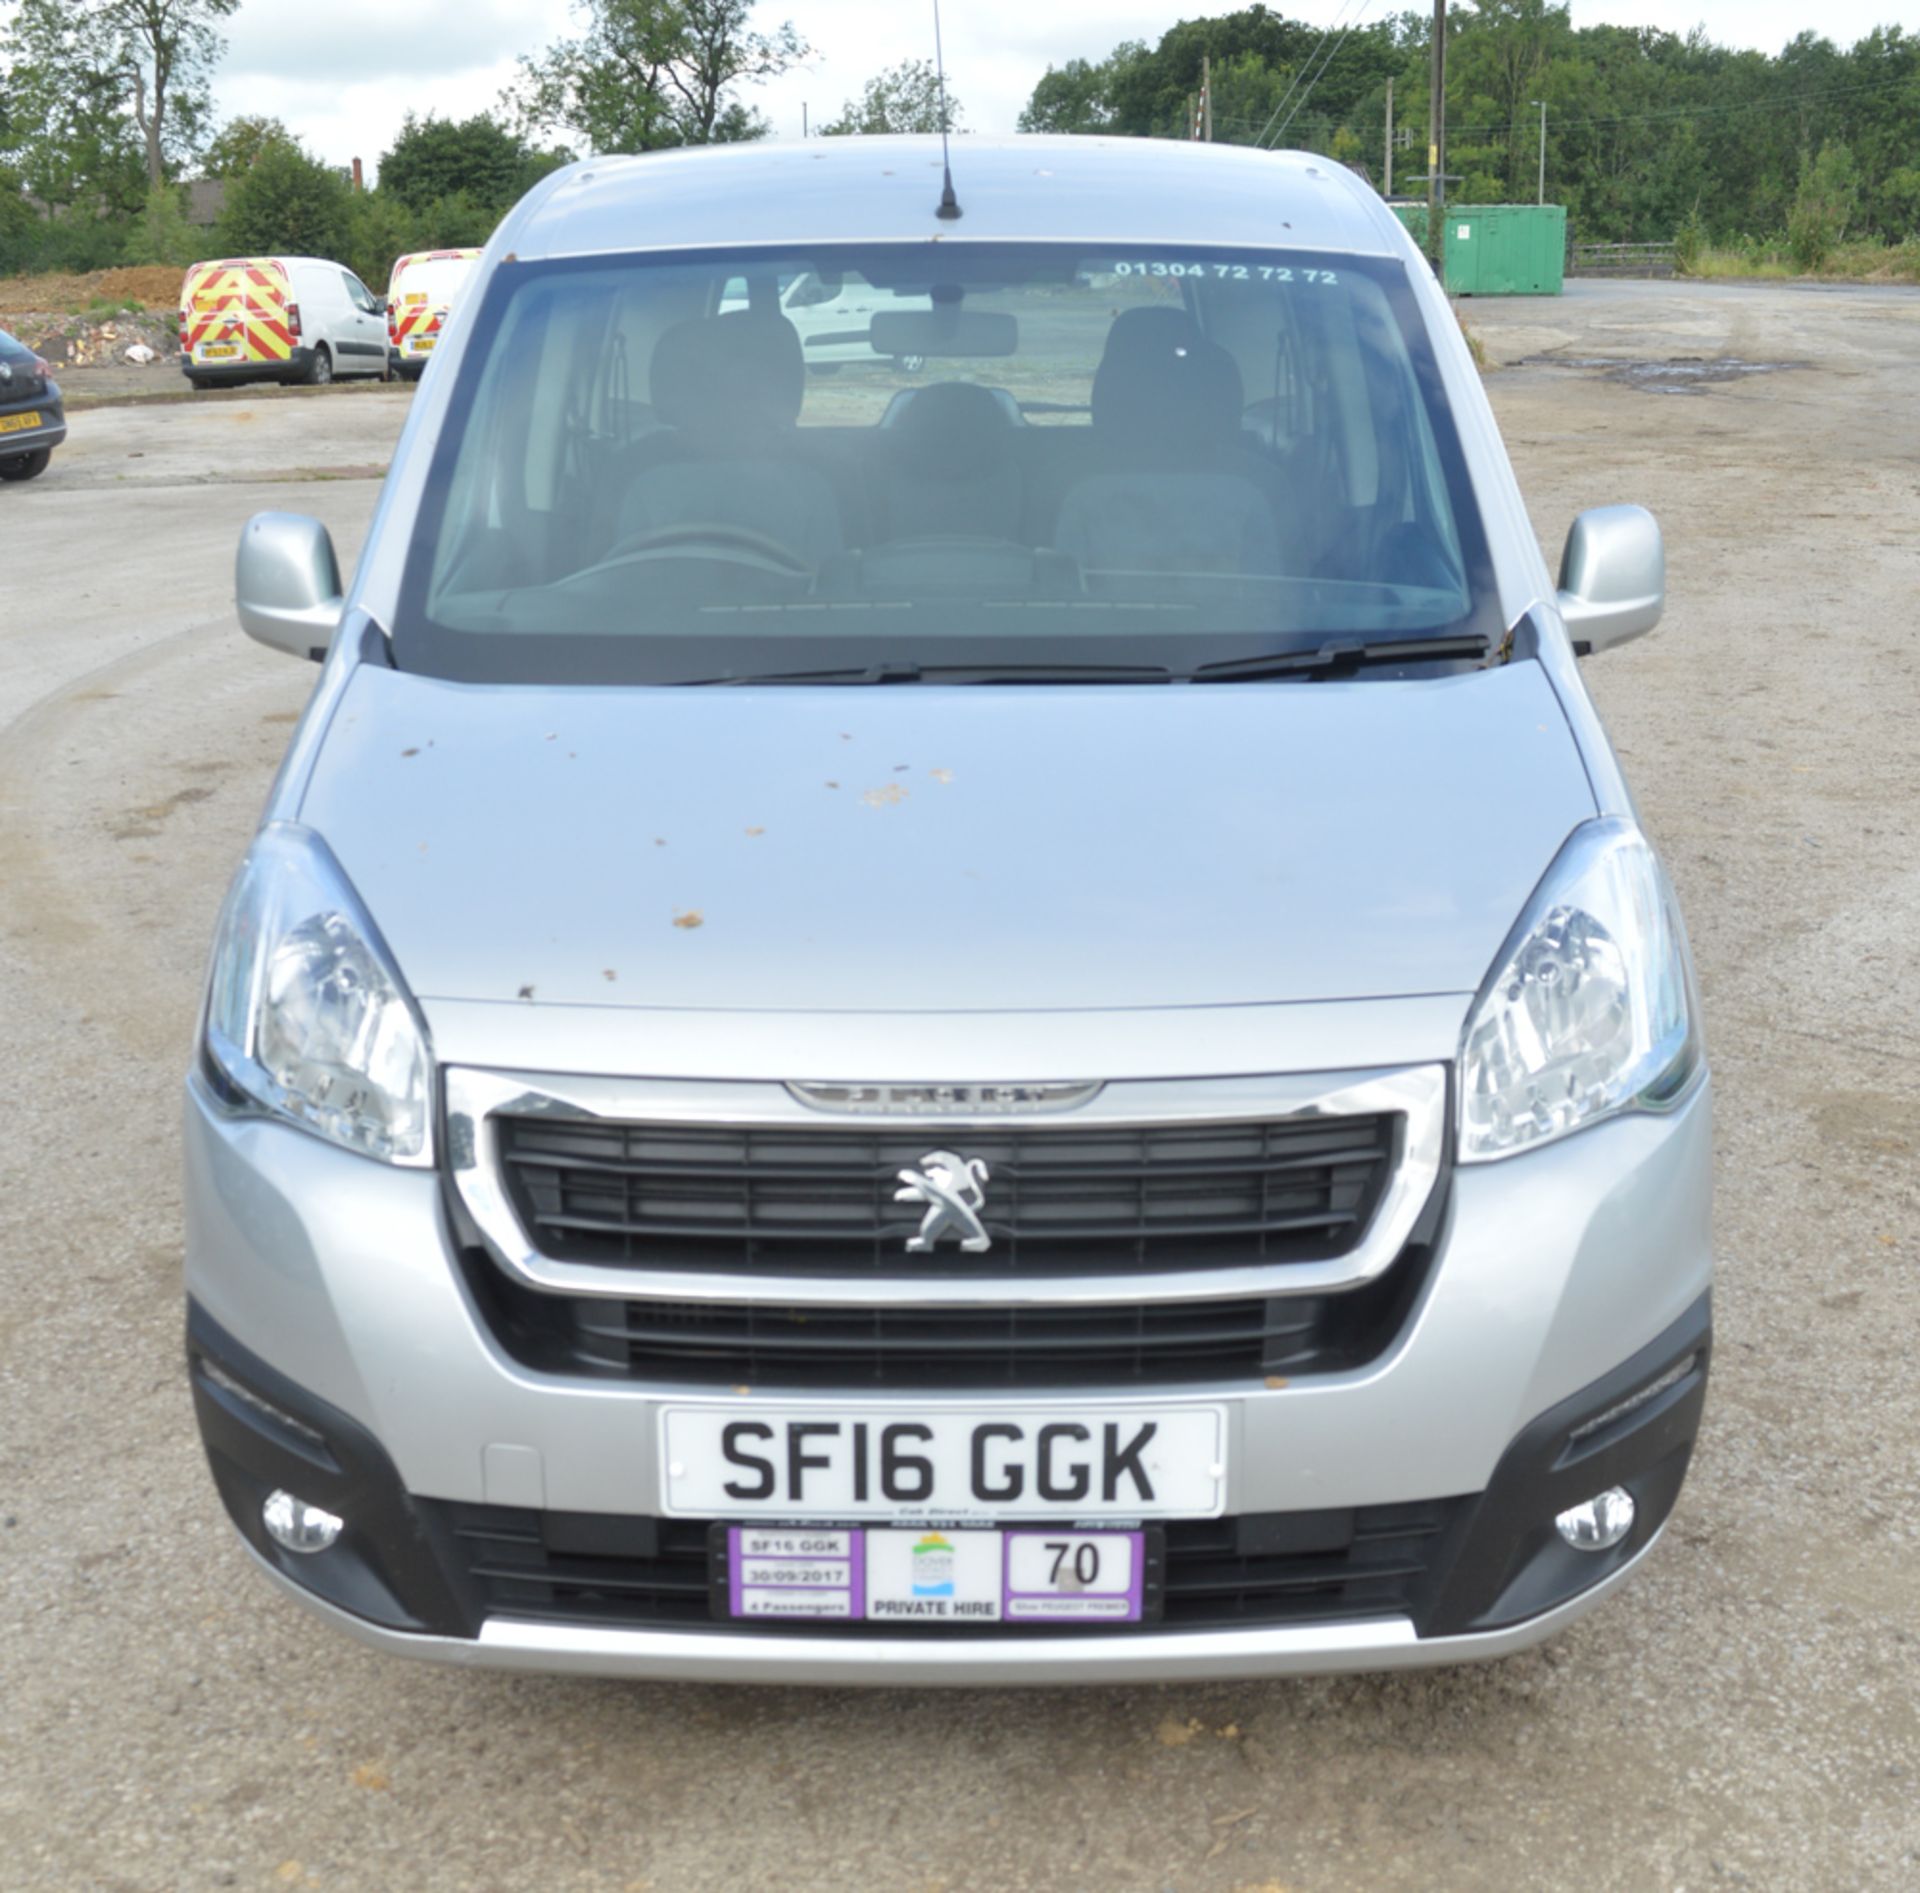 Peugeot Premier RS Blue HDI S/S 5 seat wheelchair access MPV Registration number: SF16 GGK  Date - Image 5 of 10